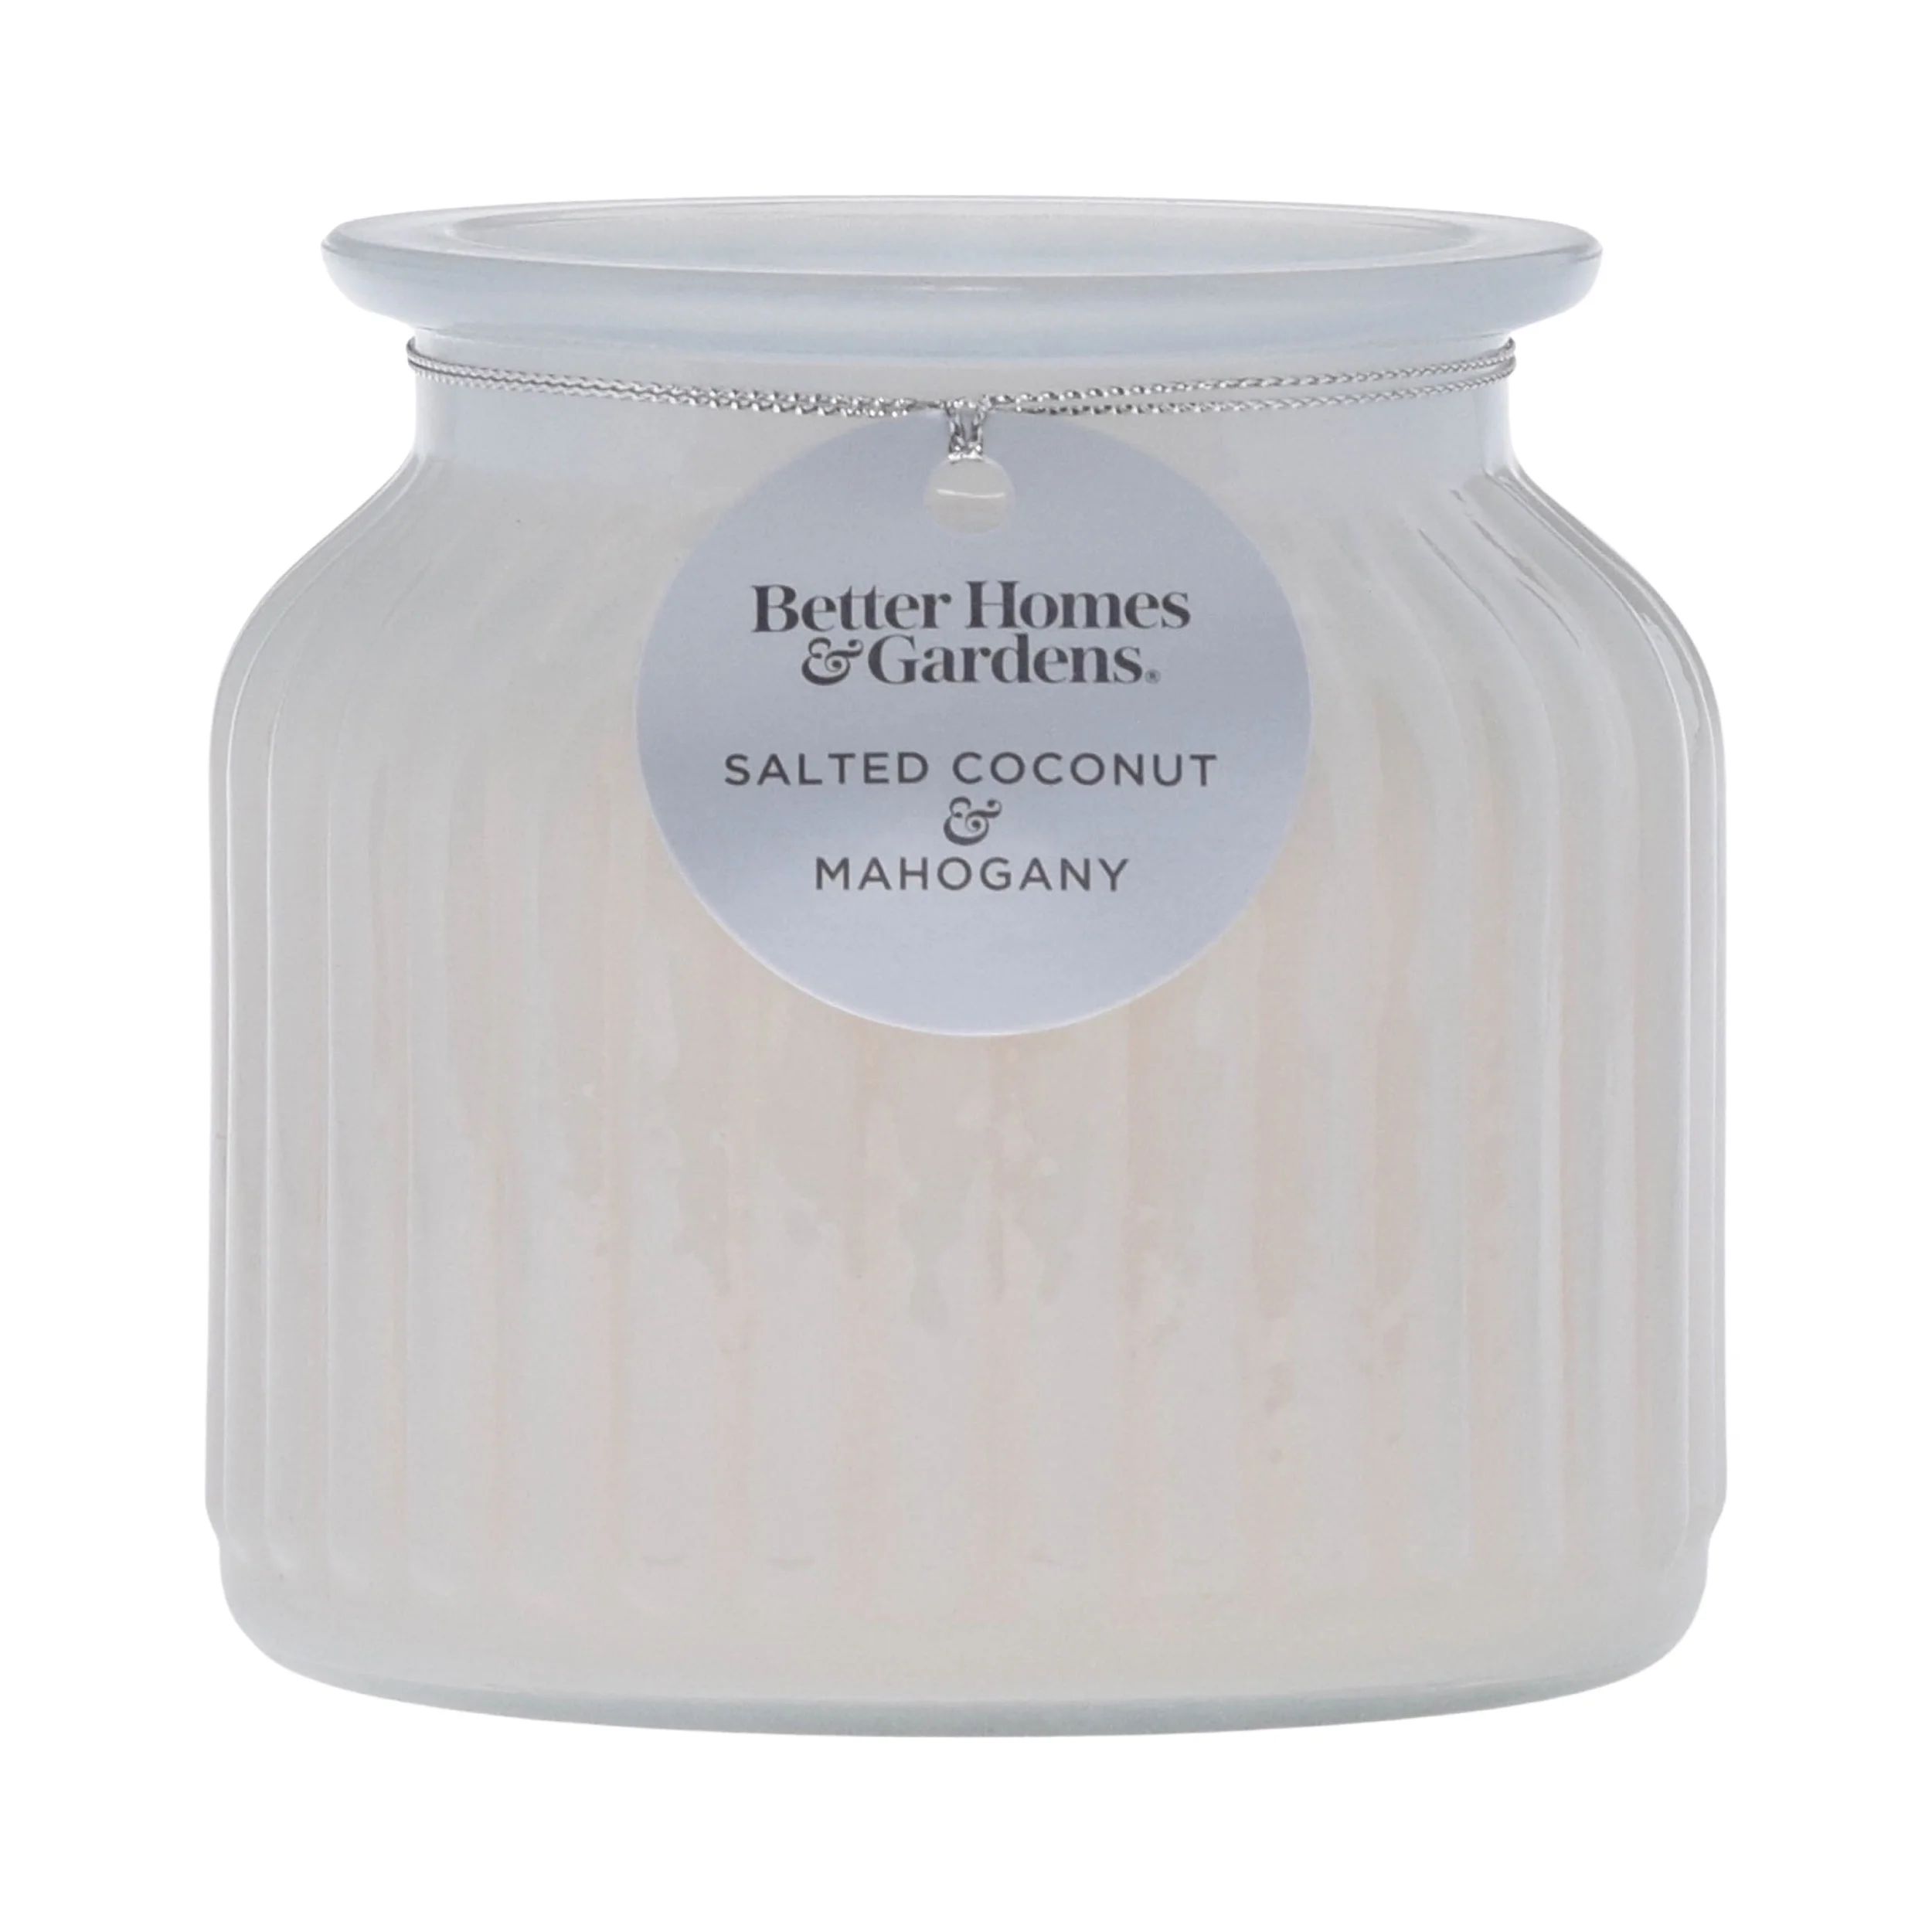 Better Homes & Gardens 16.5oz Salted Coconut & Mahogany Scented 2 Wick Pagoda Jar Candle | Walmart (US)